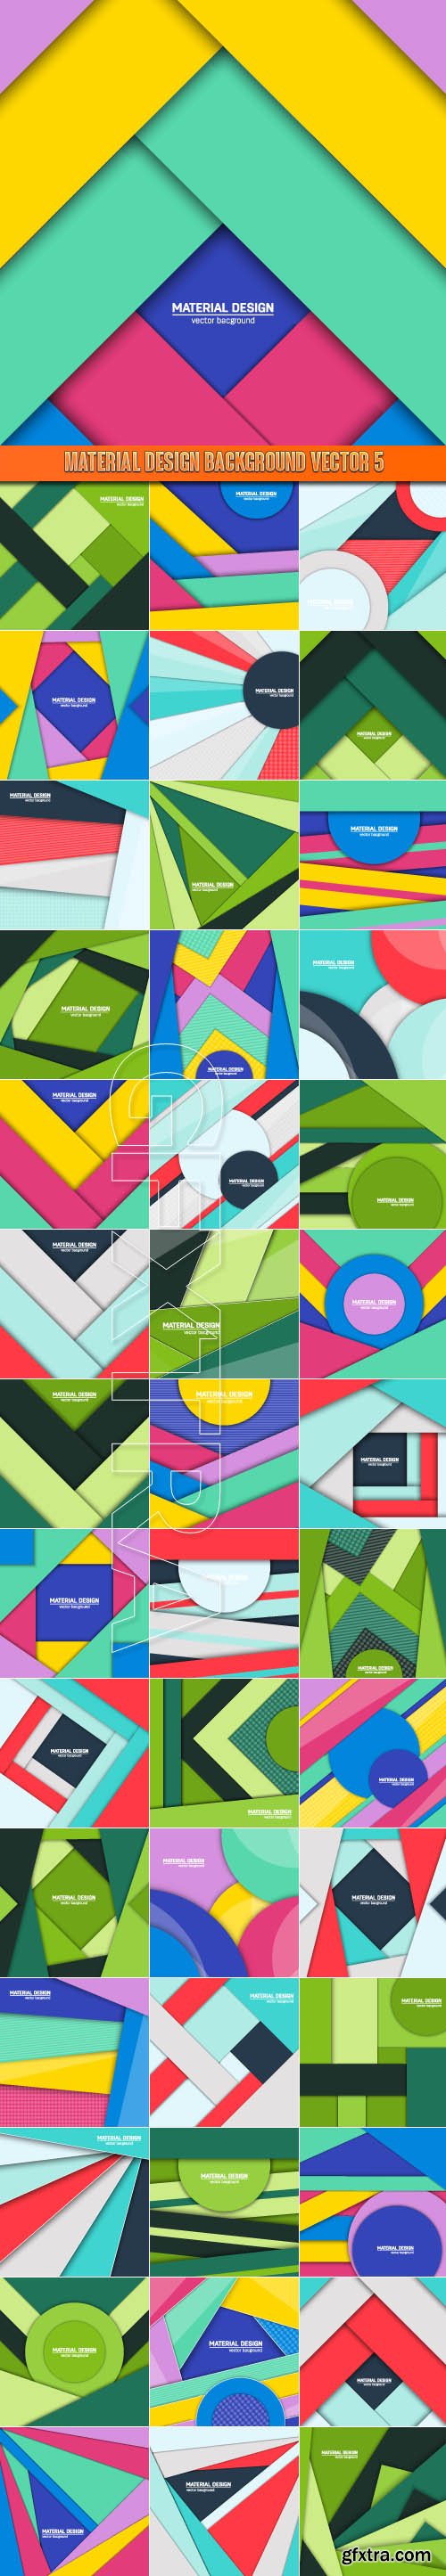 Material design background vector 5